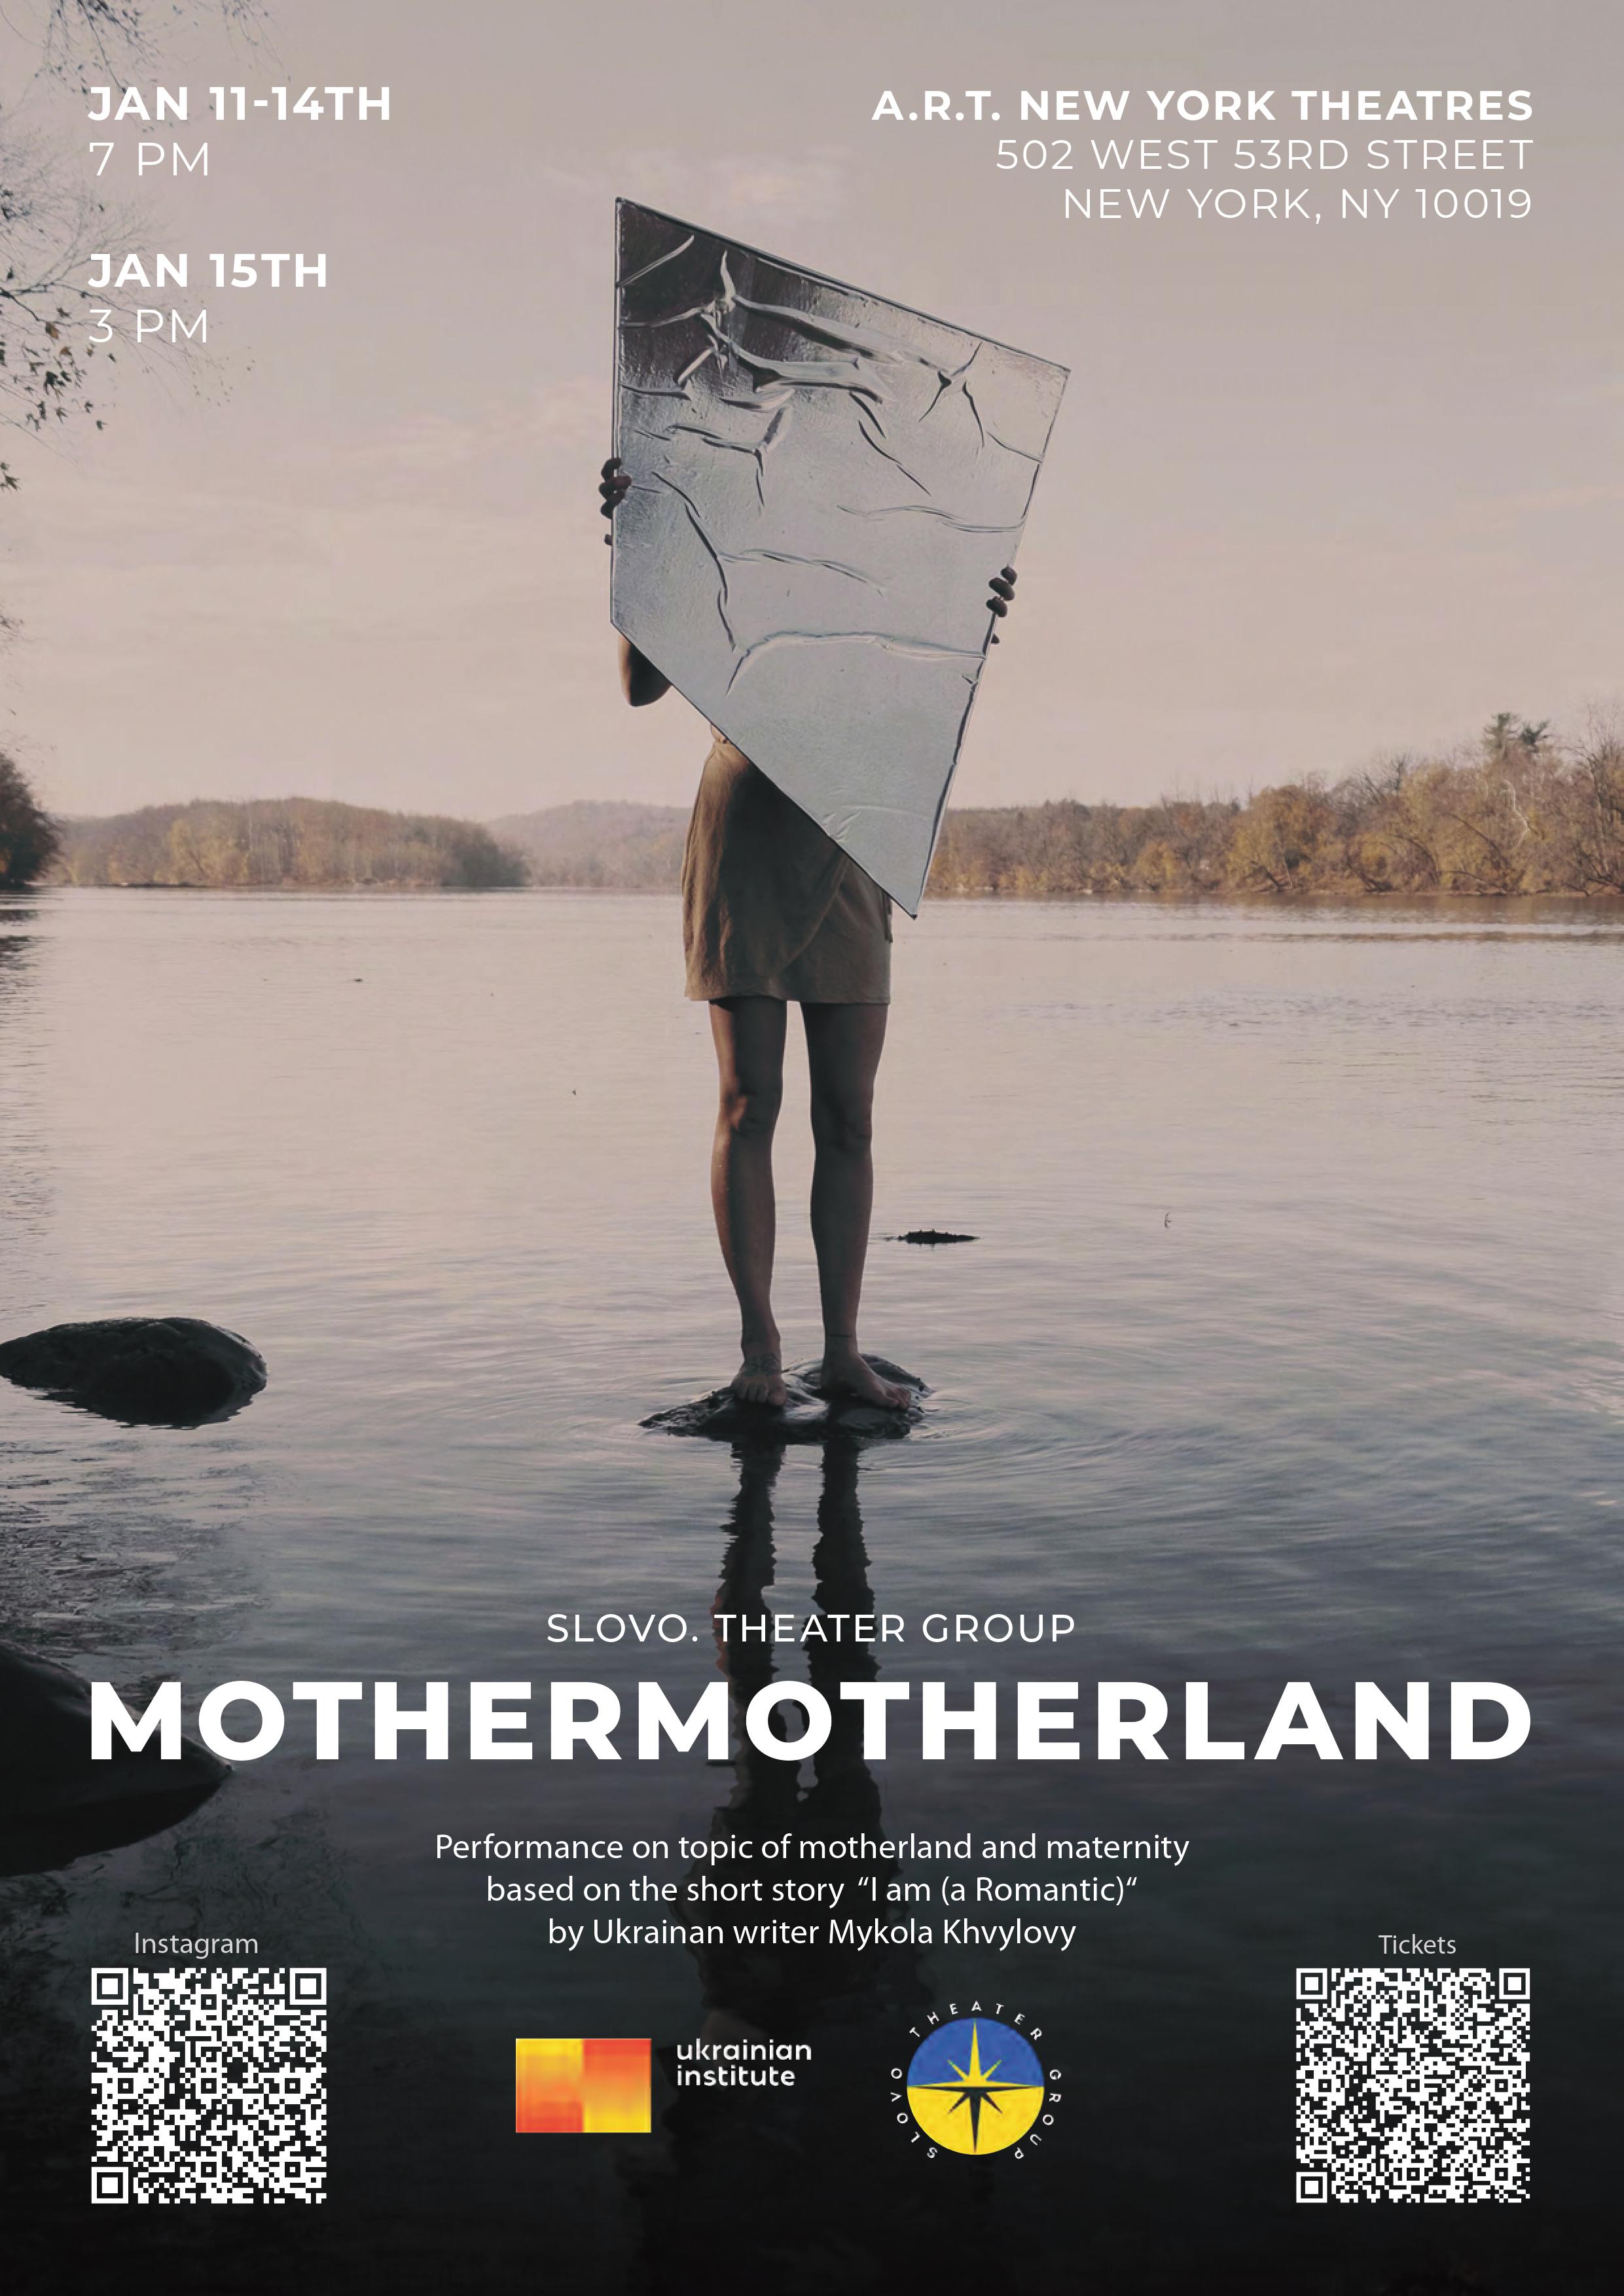 Image for Mothermotherland. A figure stands on a rock in the center of a lake. They are holding a large shard of a mirror over their face.